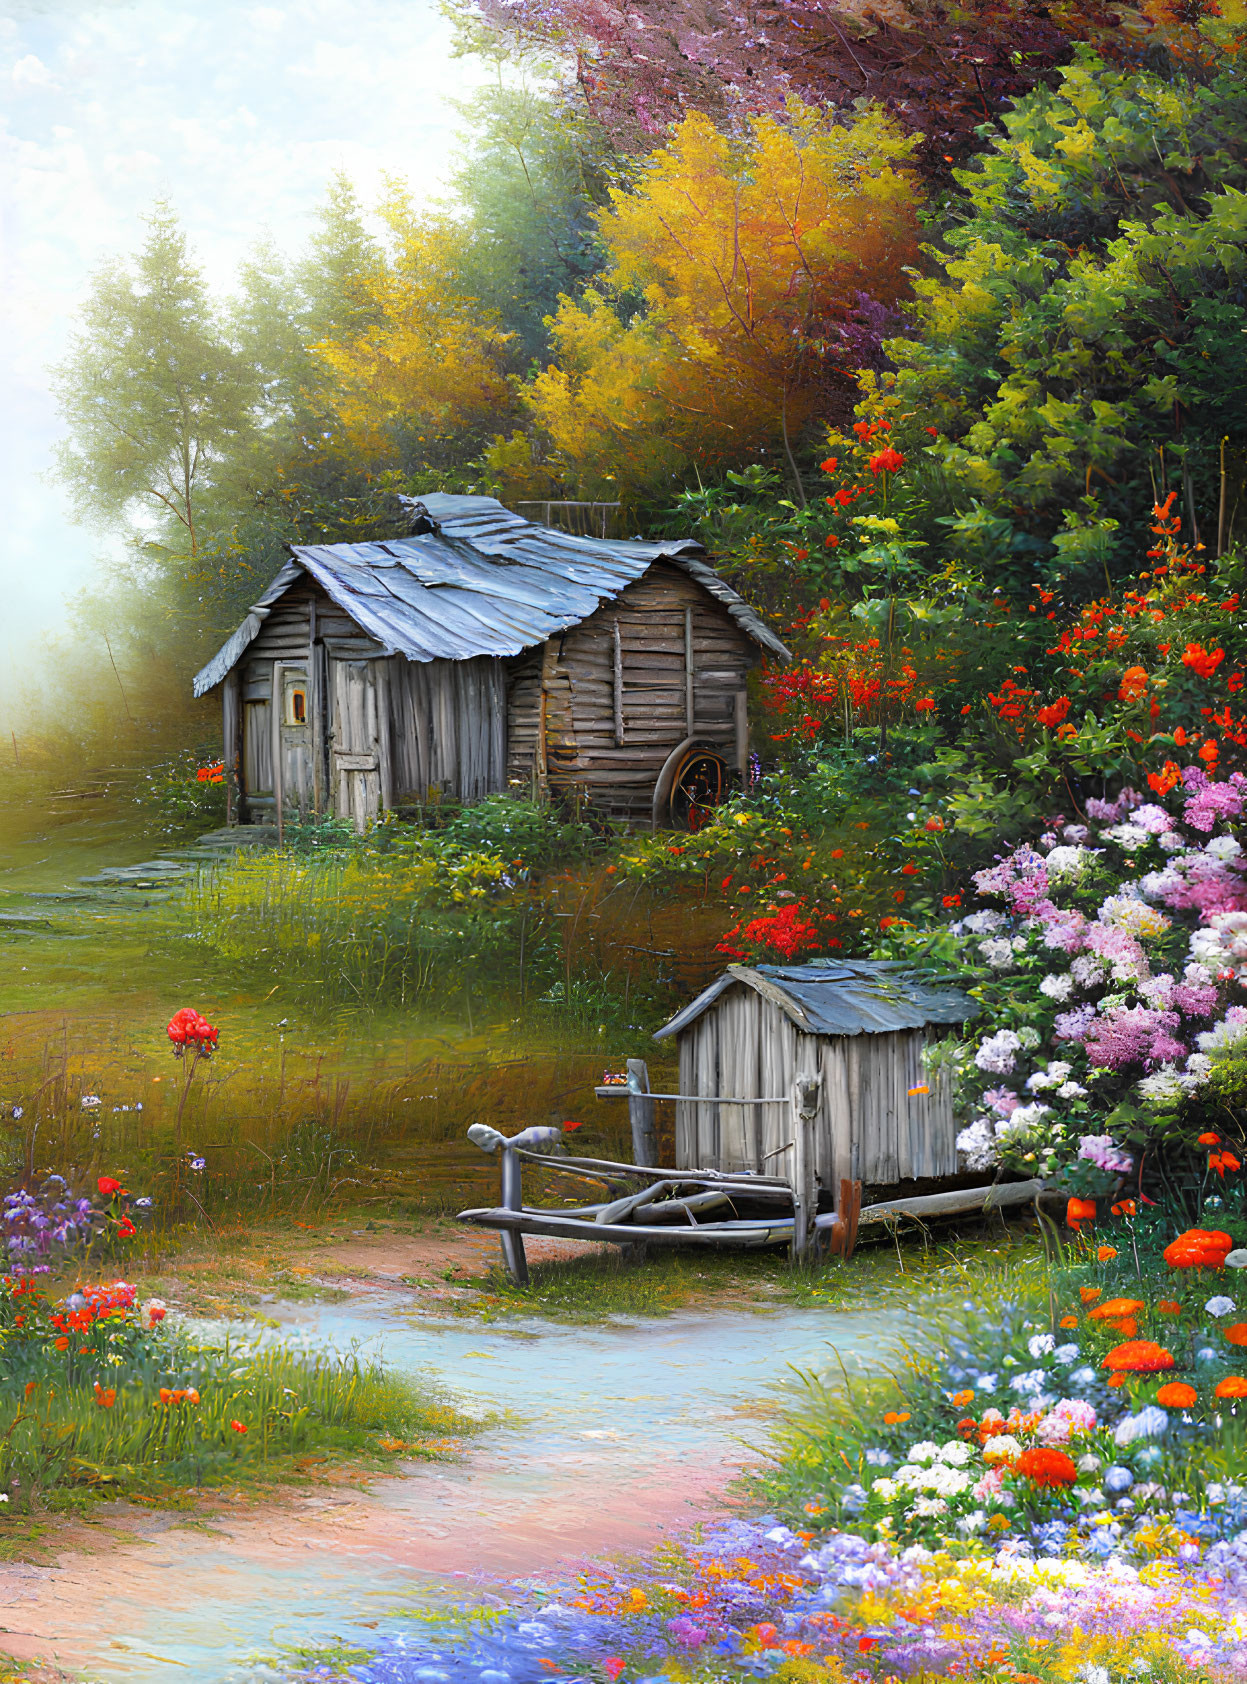 Wooden Cabin Surrounded by Flowers and Stream in Misty Forest